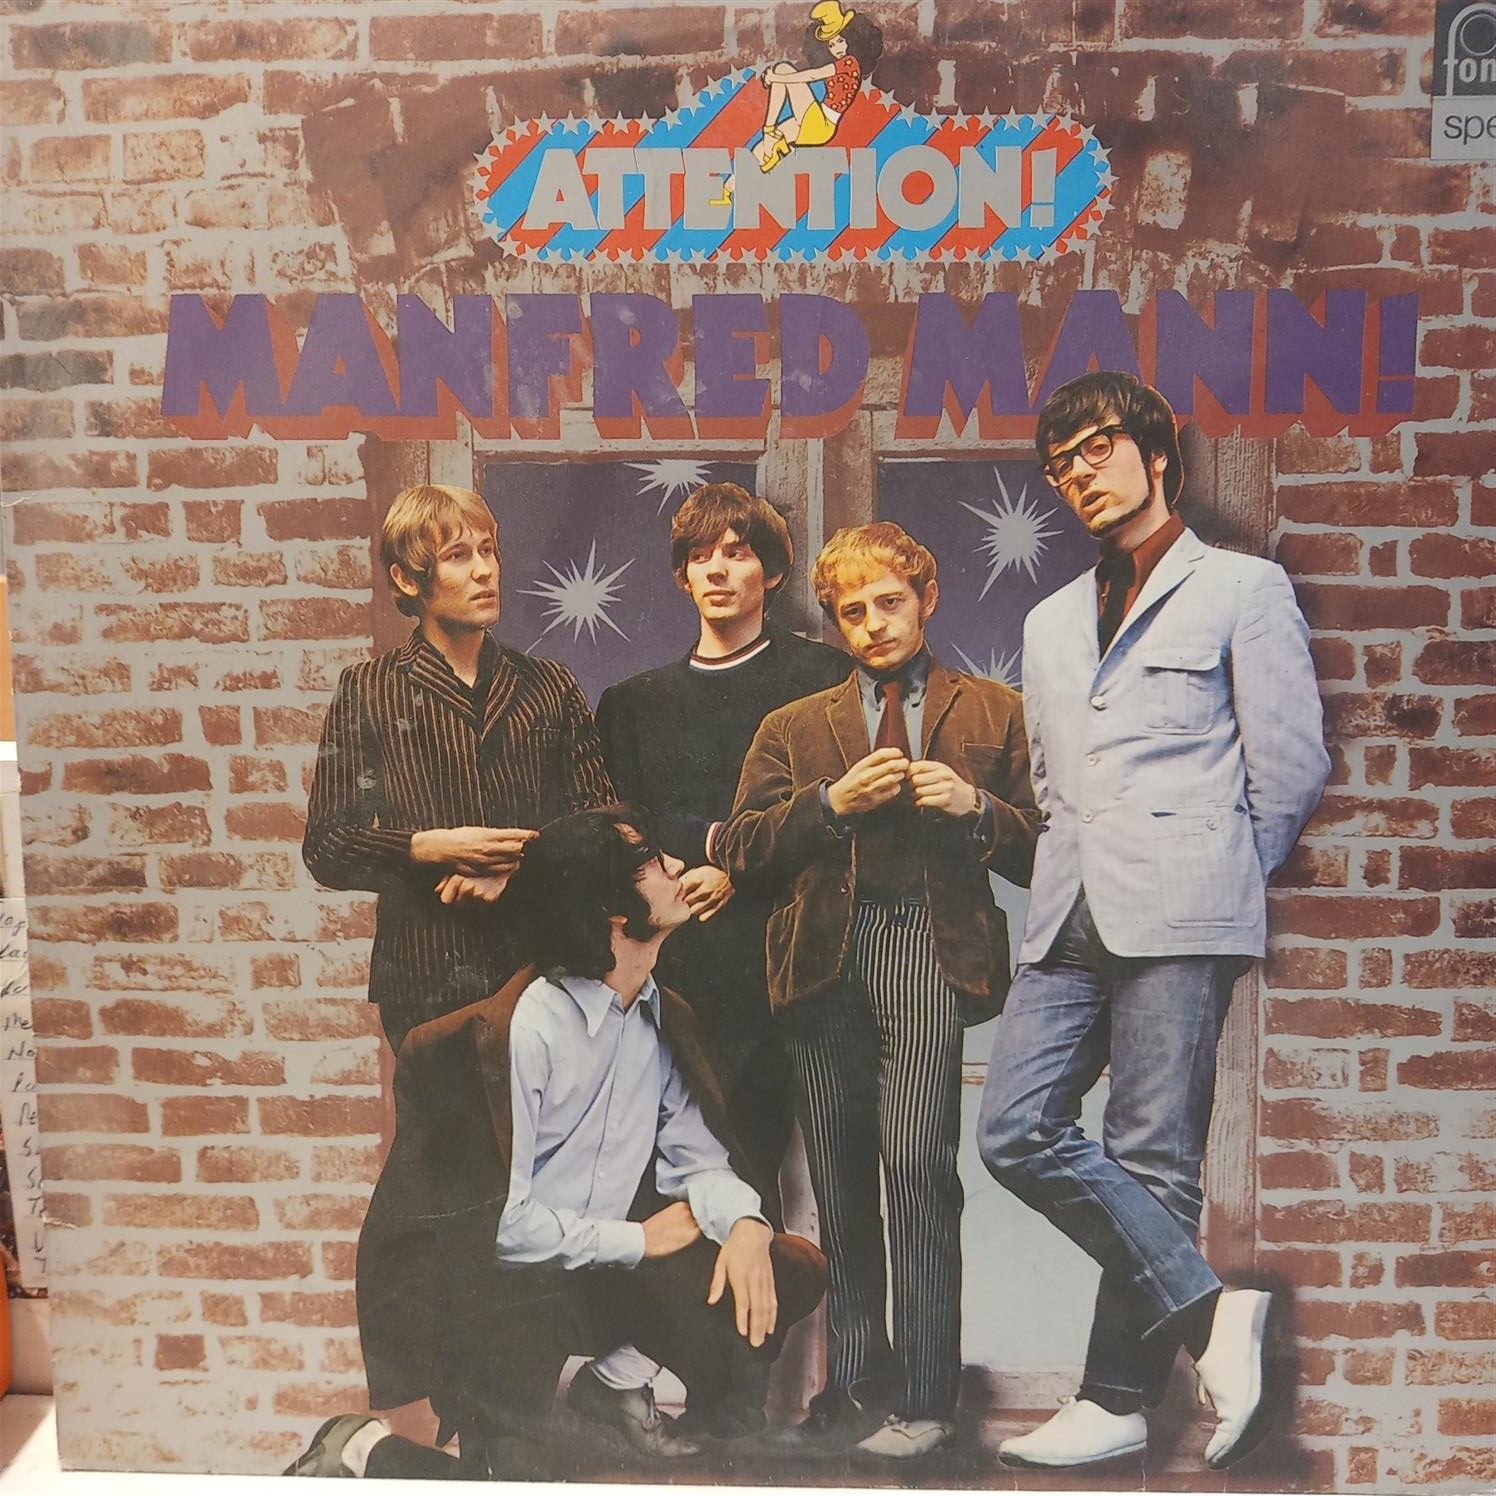 MANFRED MANN – ATTENTION! ON